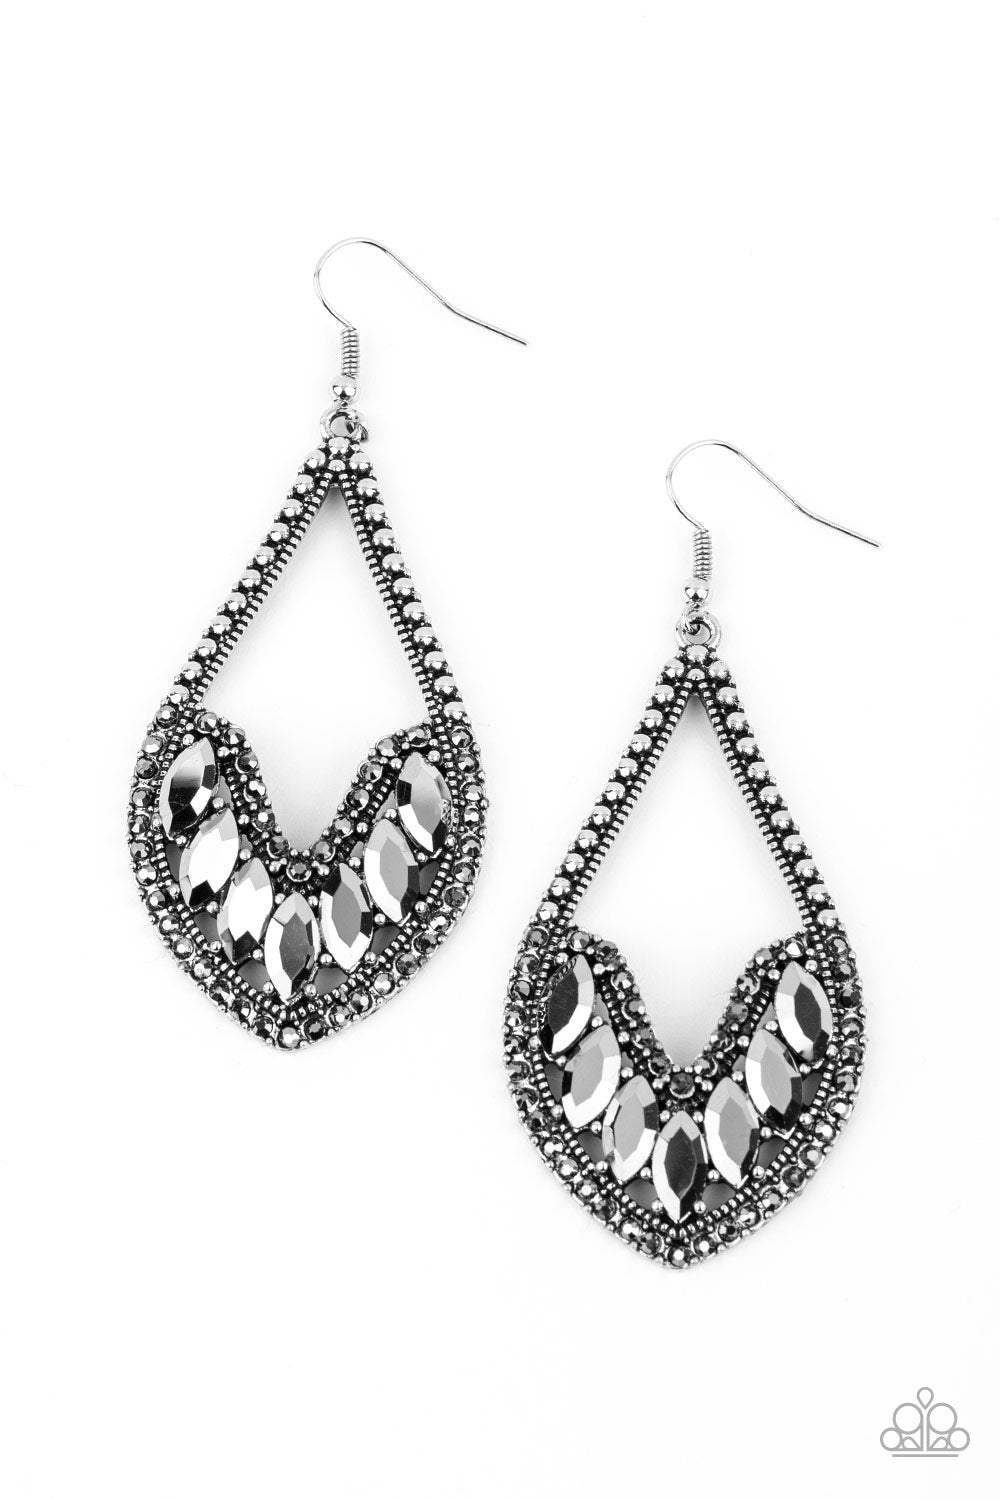 Ethereal Expressions Silver-Earrings